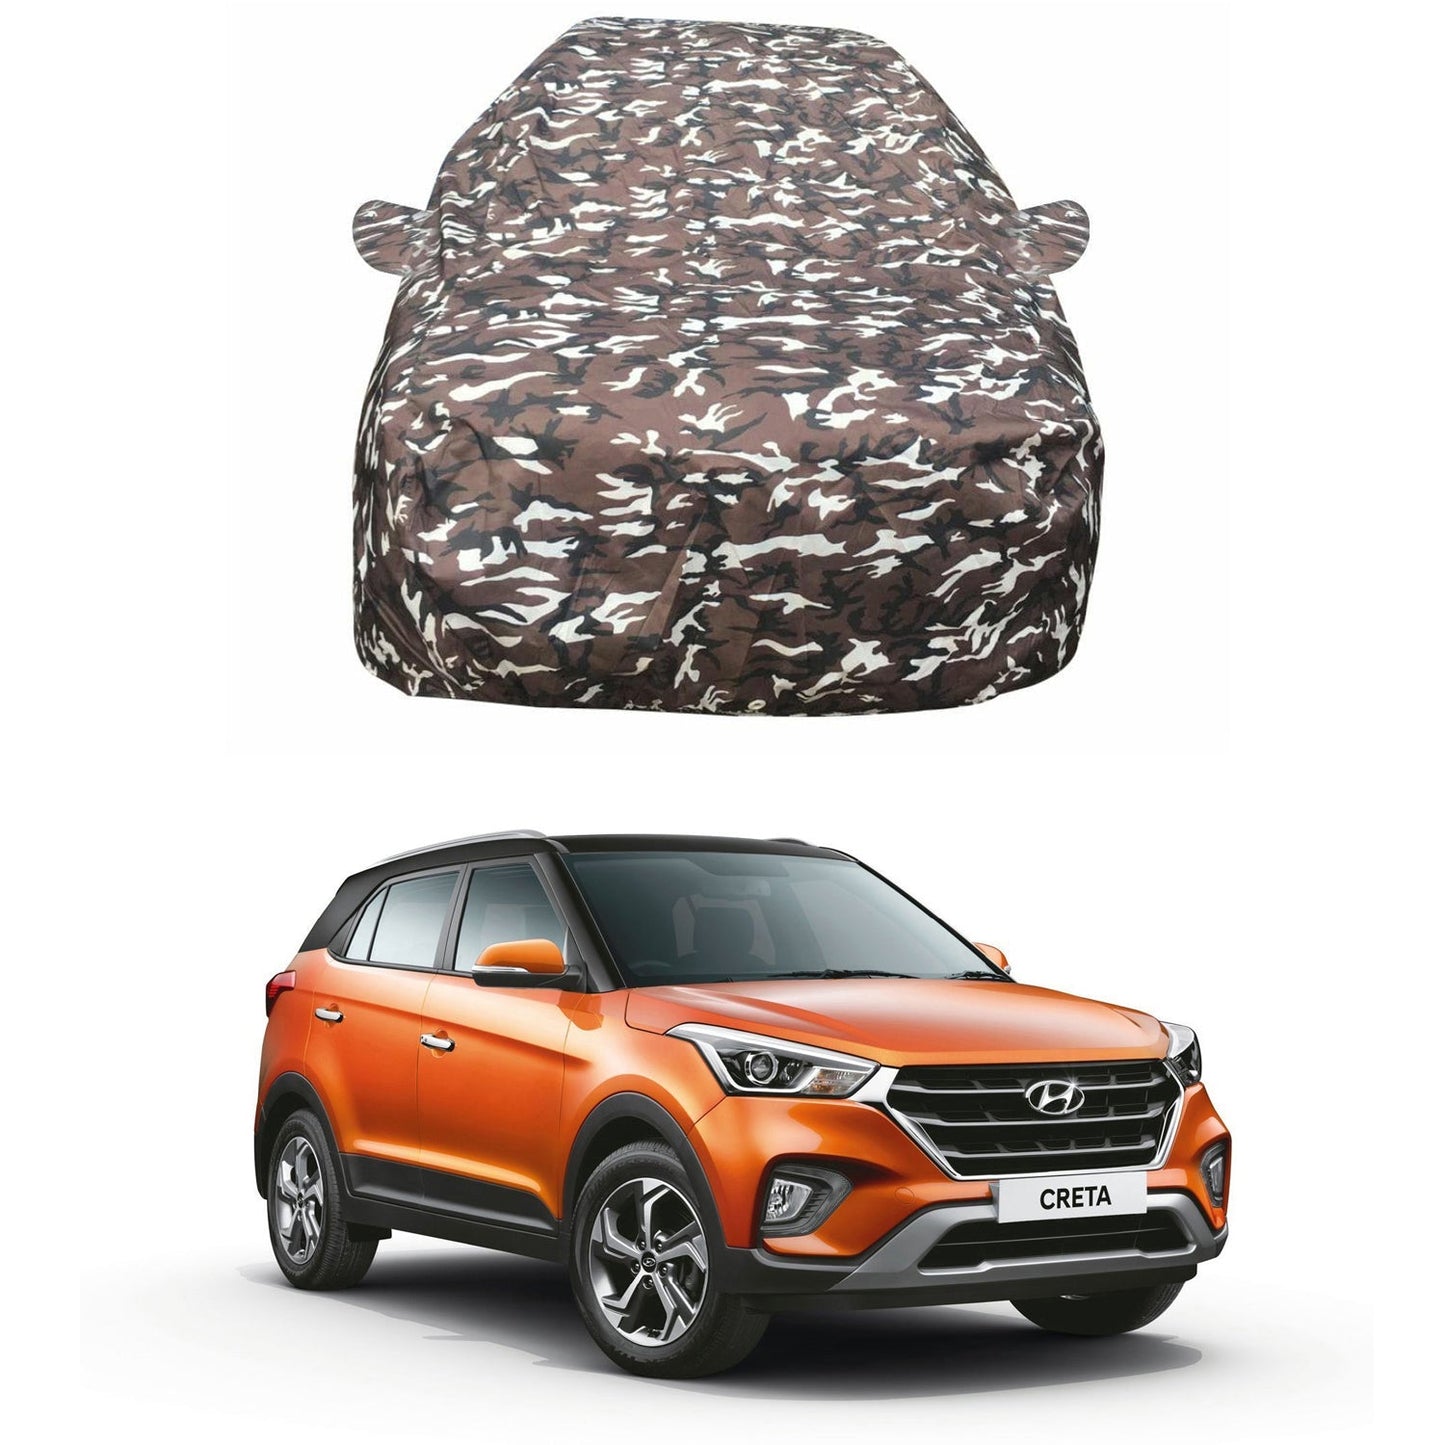 Oshotto Ranger Design Made of 100% Waterproof Fabric Multicolor Car Body Cover with Mirror Pocket For Hyundai Creta (2015-2019) All Models